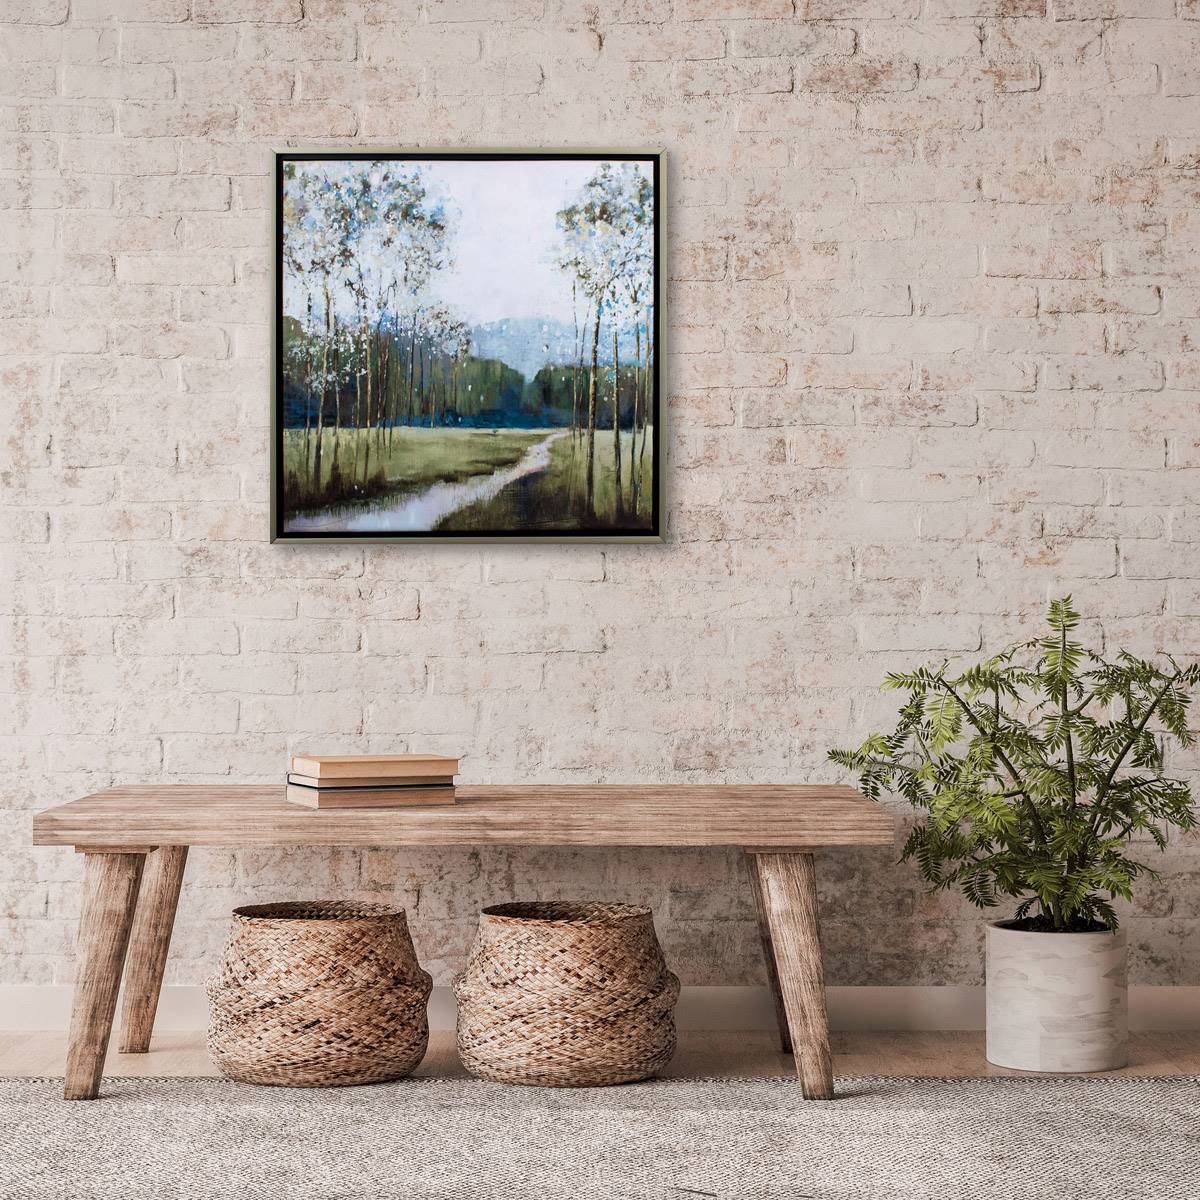 Propac Images(R) Lovely Landscape Wall Art